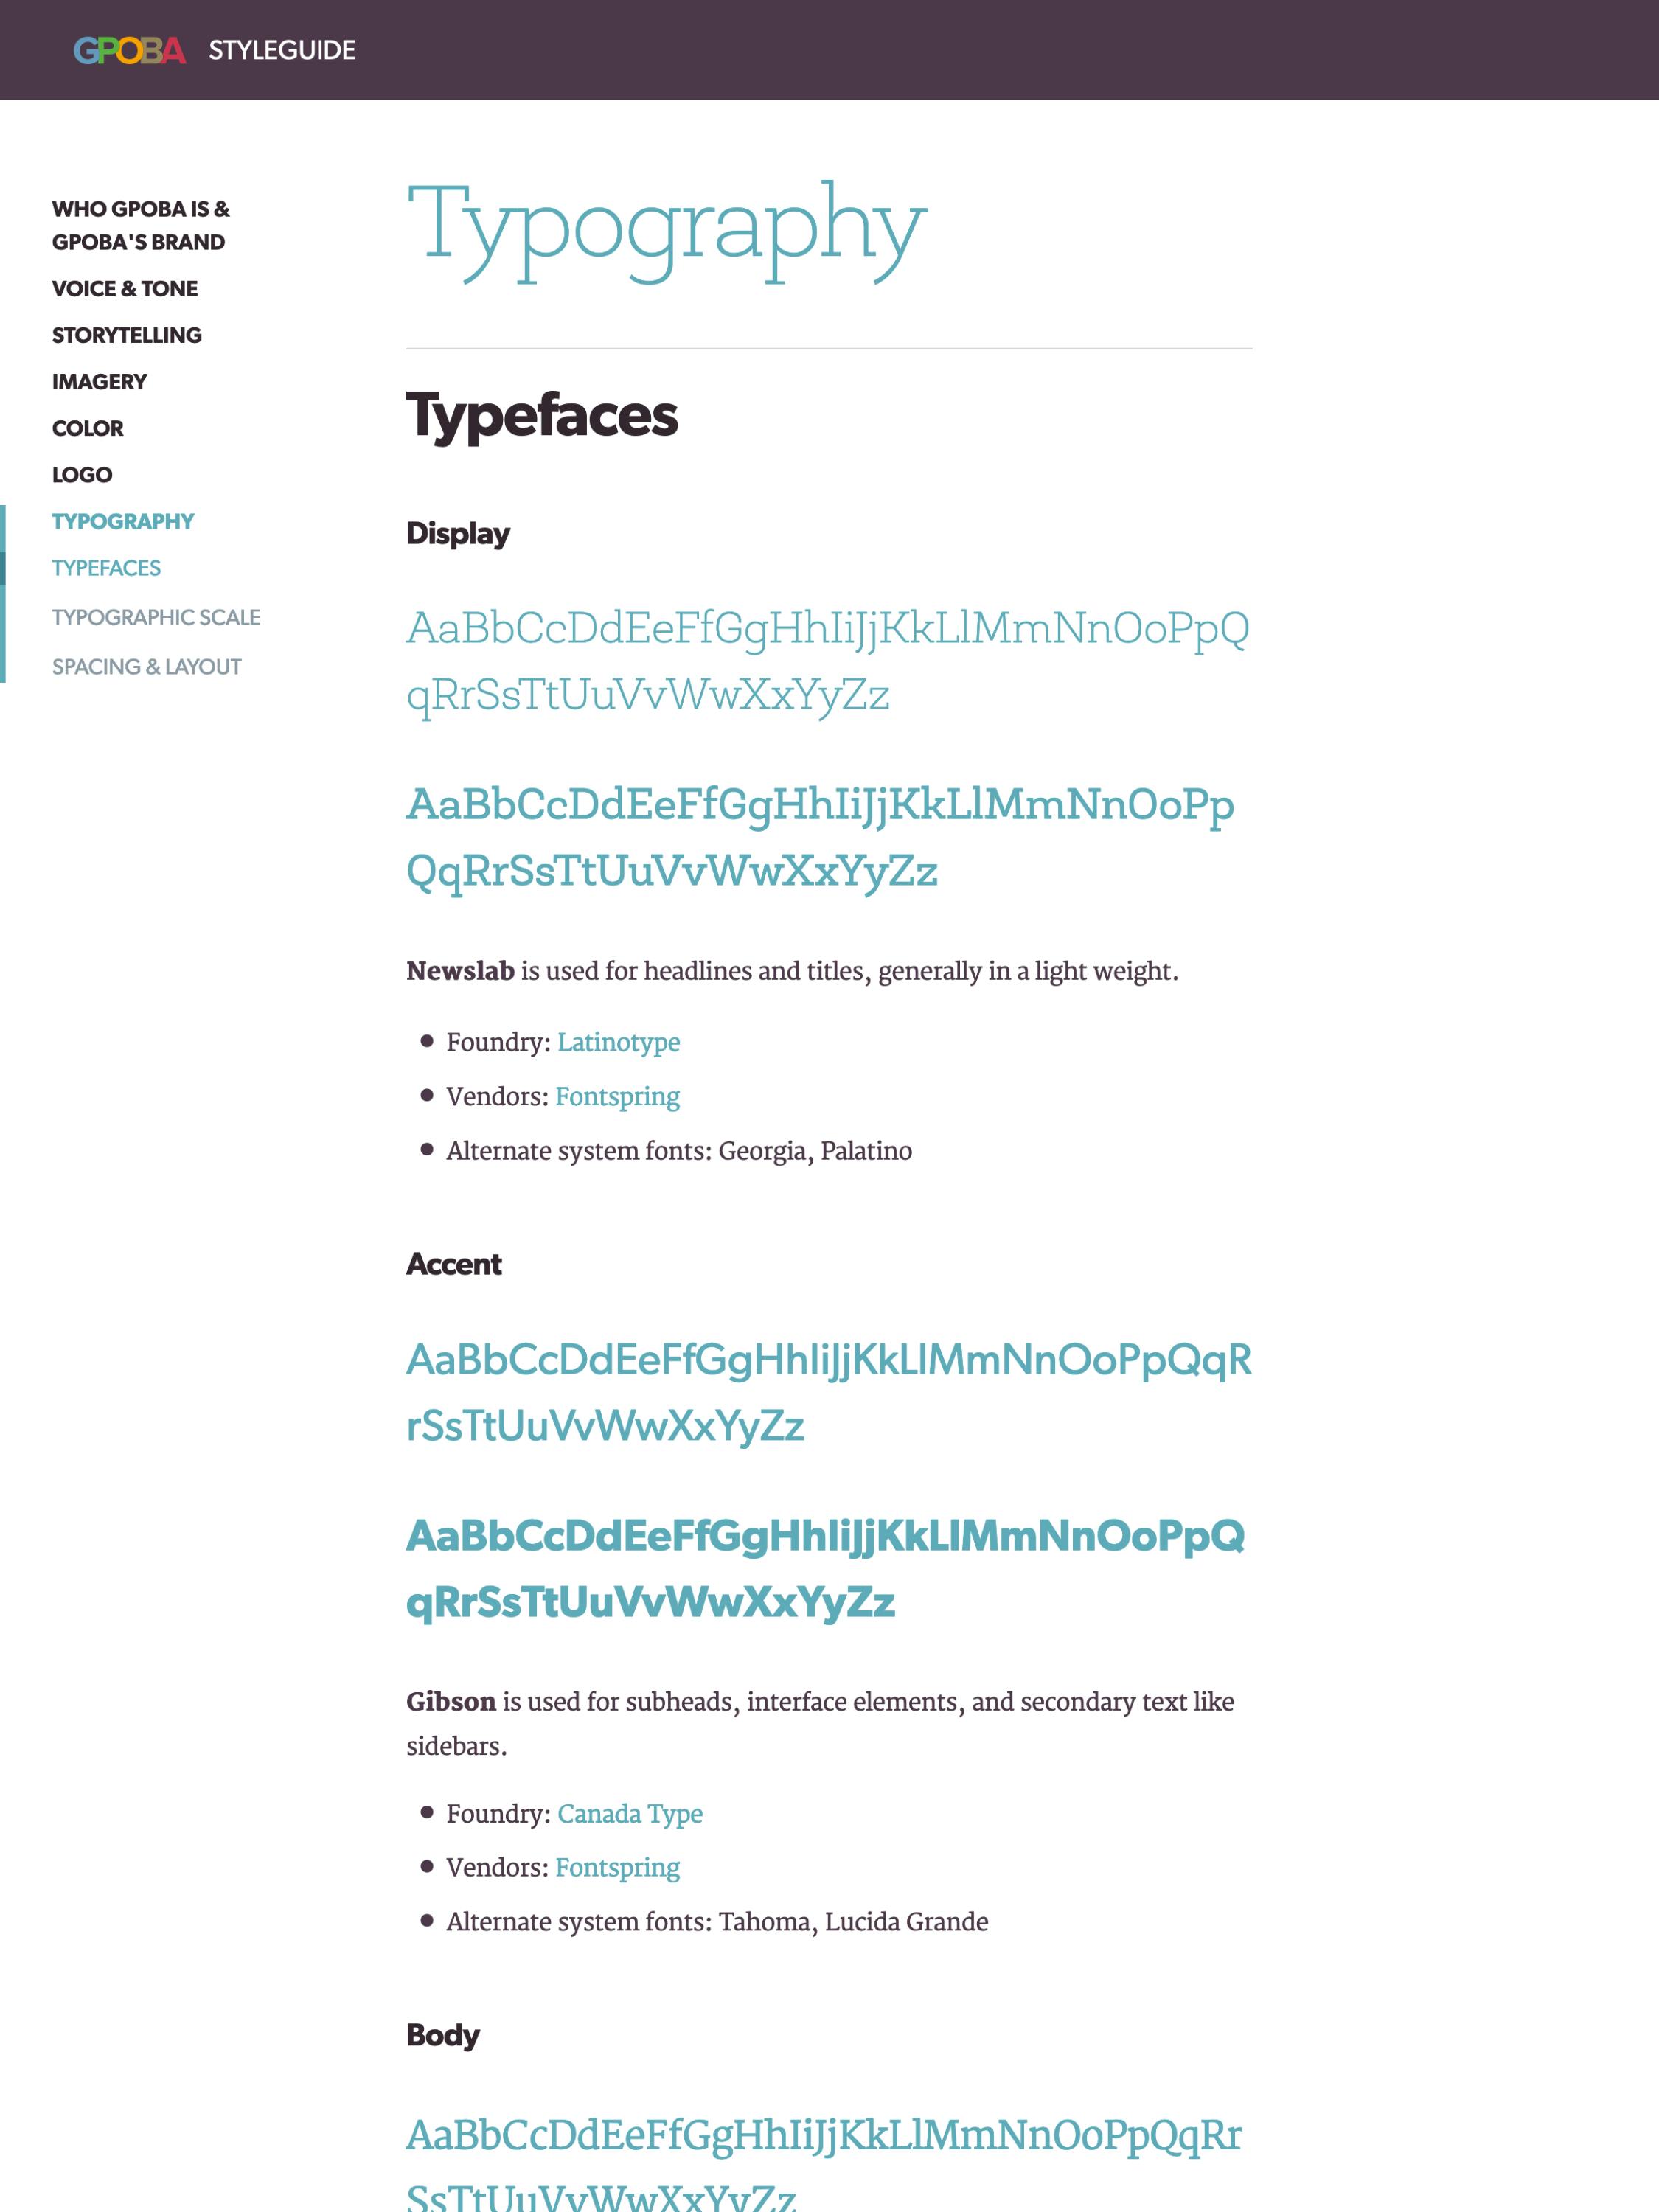 The typography page of the GPOBA brand styleguide